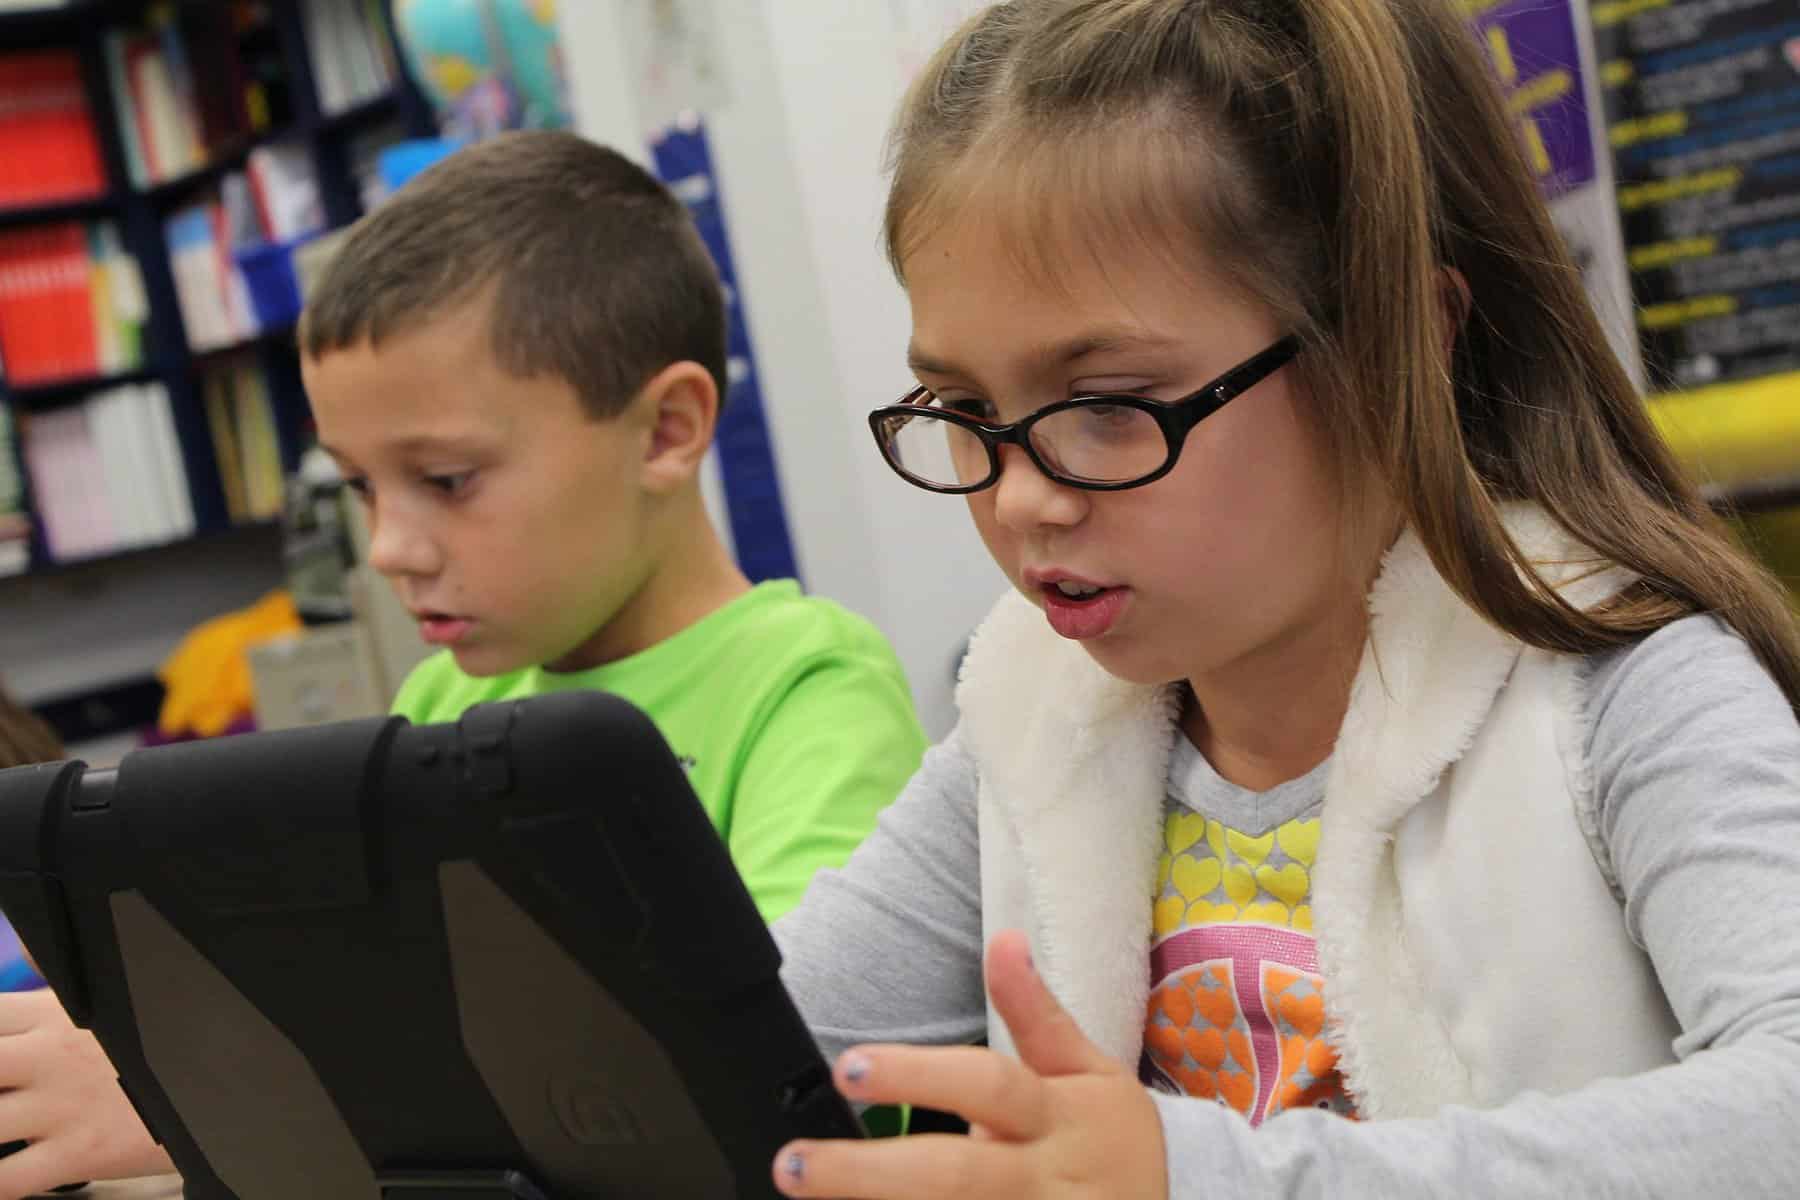 A young girl in glasses is seen looking at a tablet device in a classroom setting.